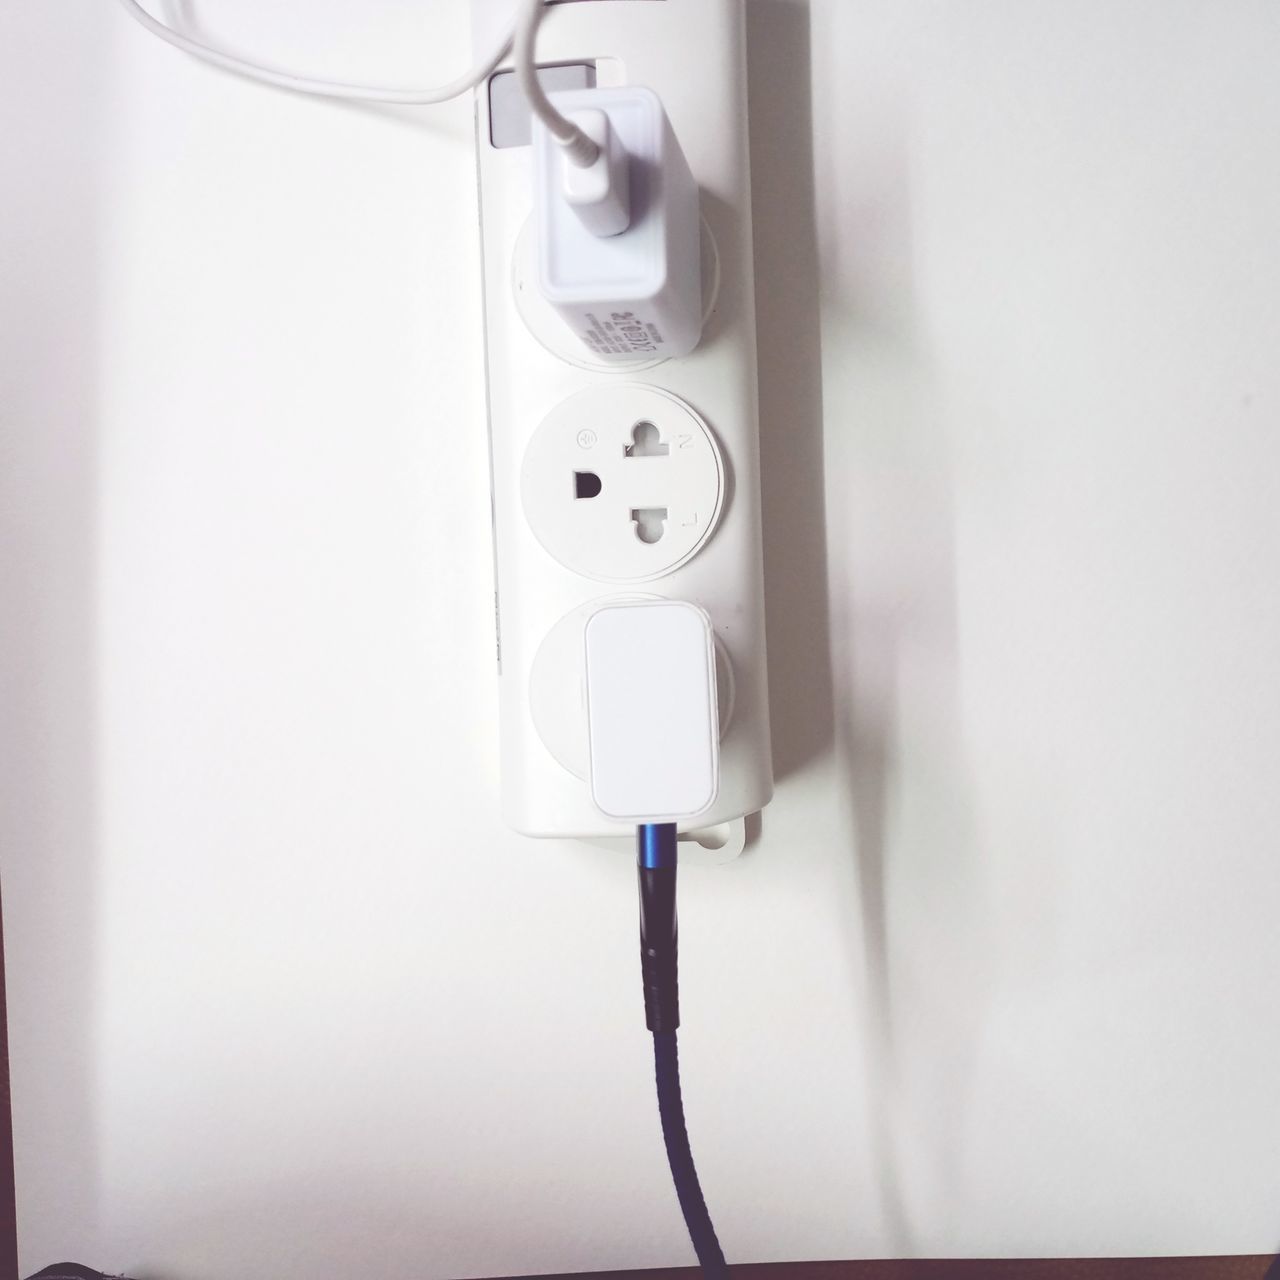 power plugs and sockets, technology, electricity, cable, indoors, wall - building feature, electric plug, home interior, outlet, no people, white, power supply, domestic room